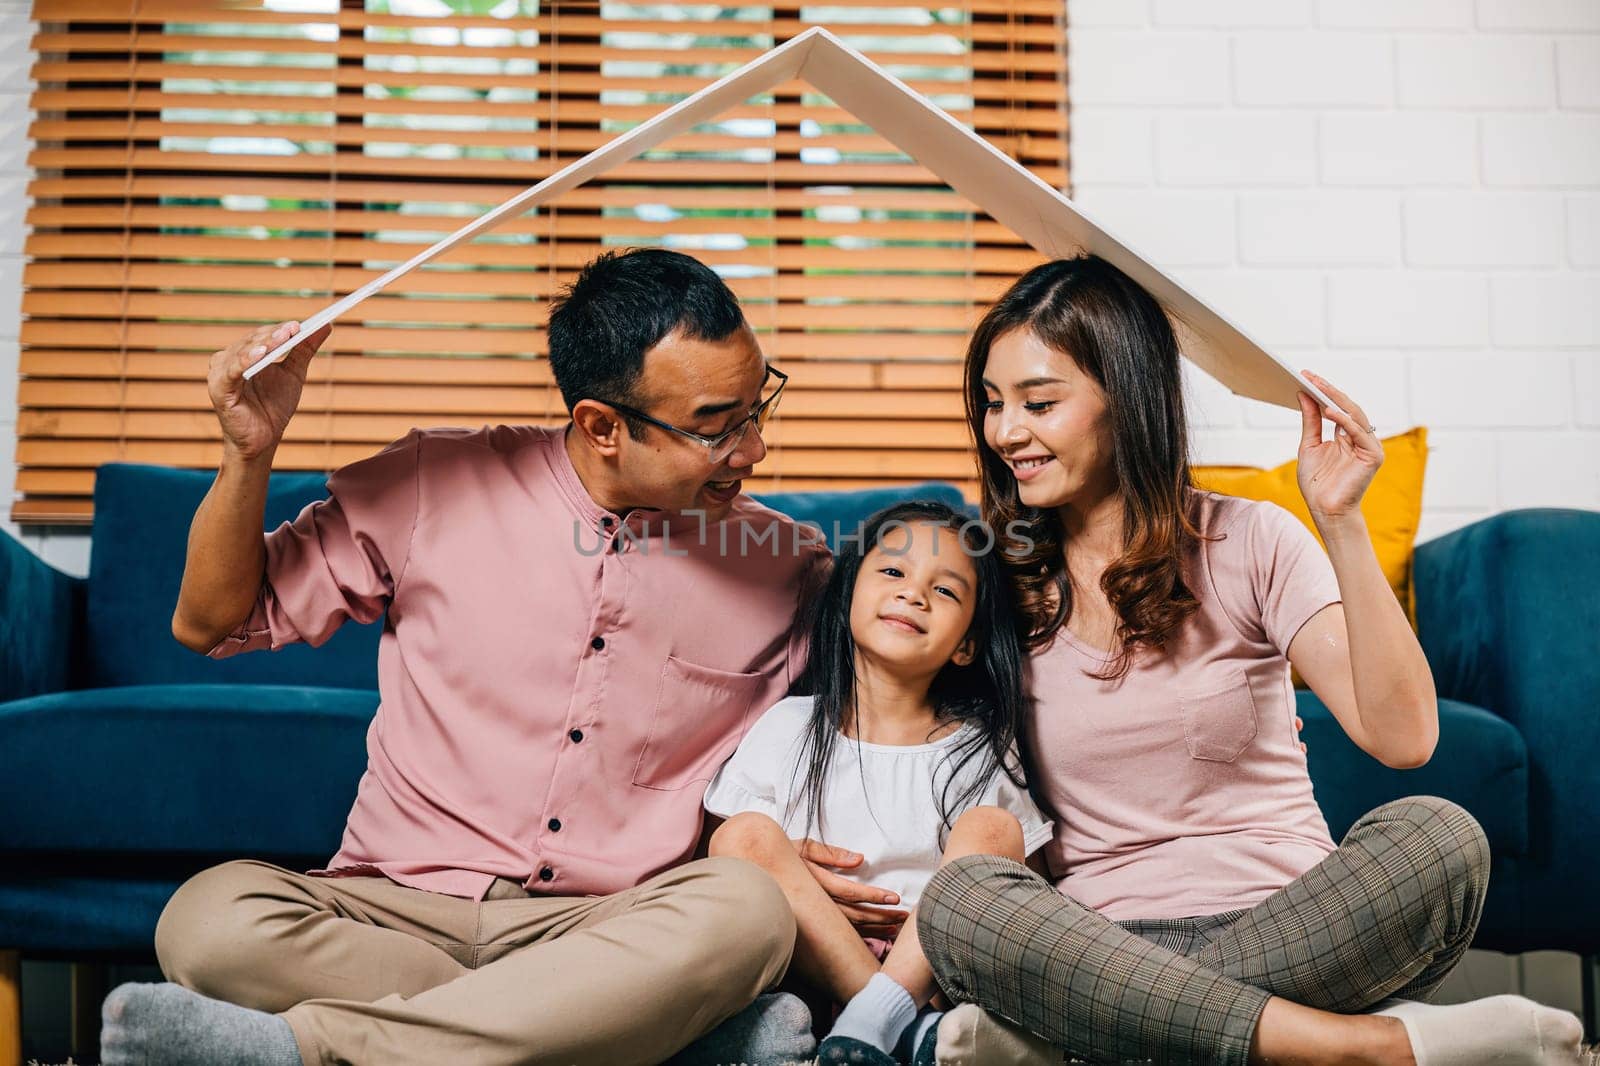 A portrait of a harmonious family sitting on a couch holding a cardboard roof radiating happiness and security in their new house. Asian parents and their daughter are all smiles.